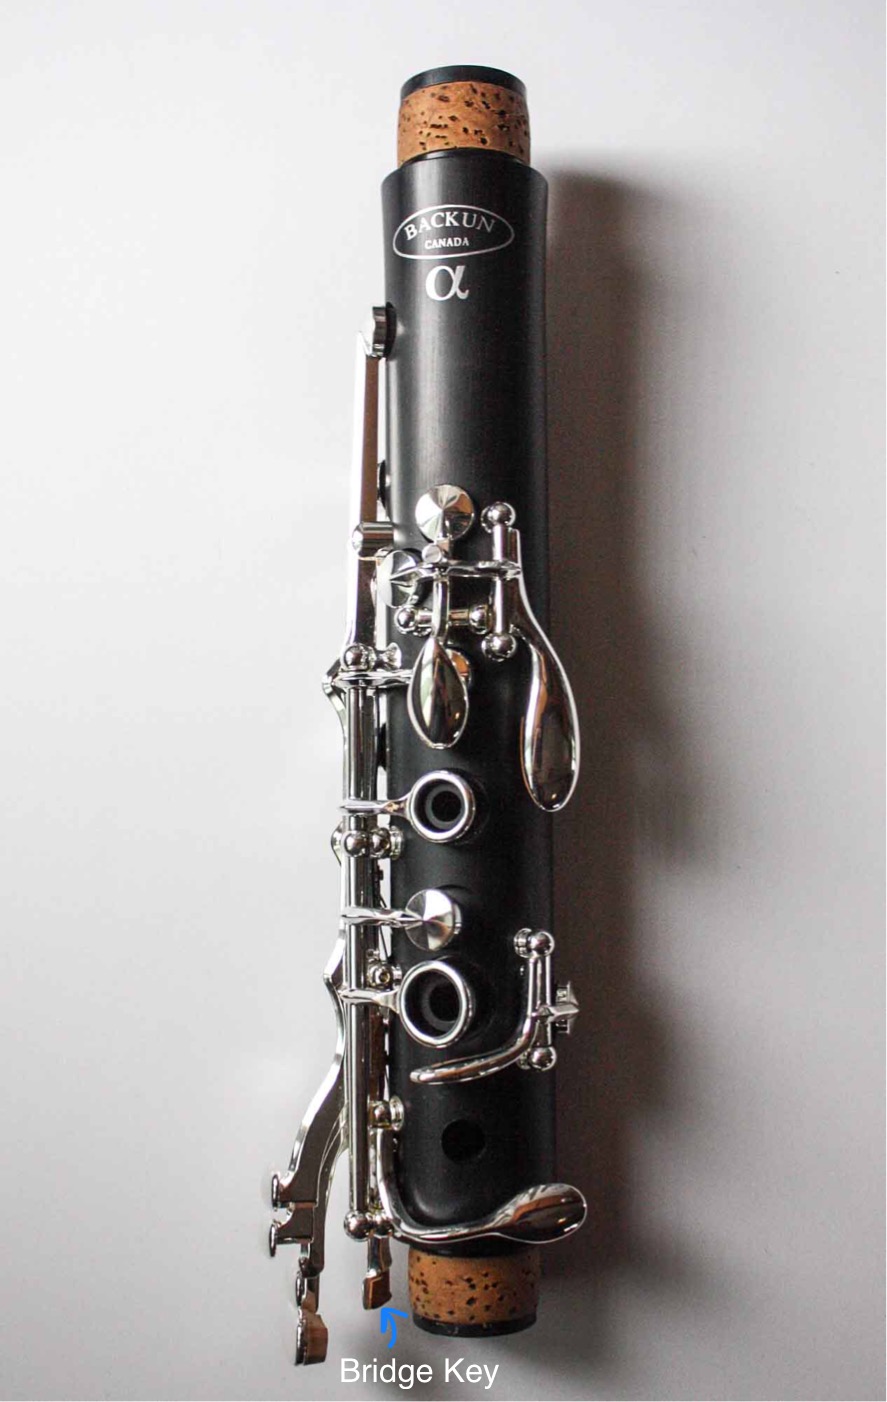 The upper joint of the clarinet